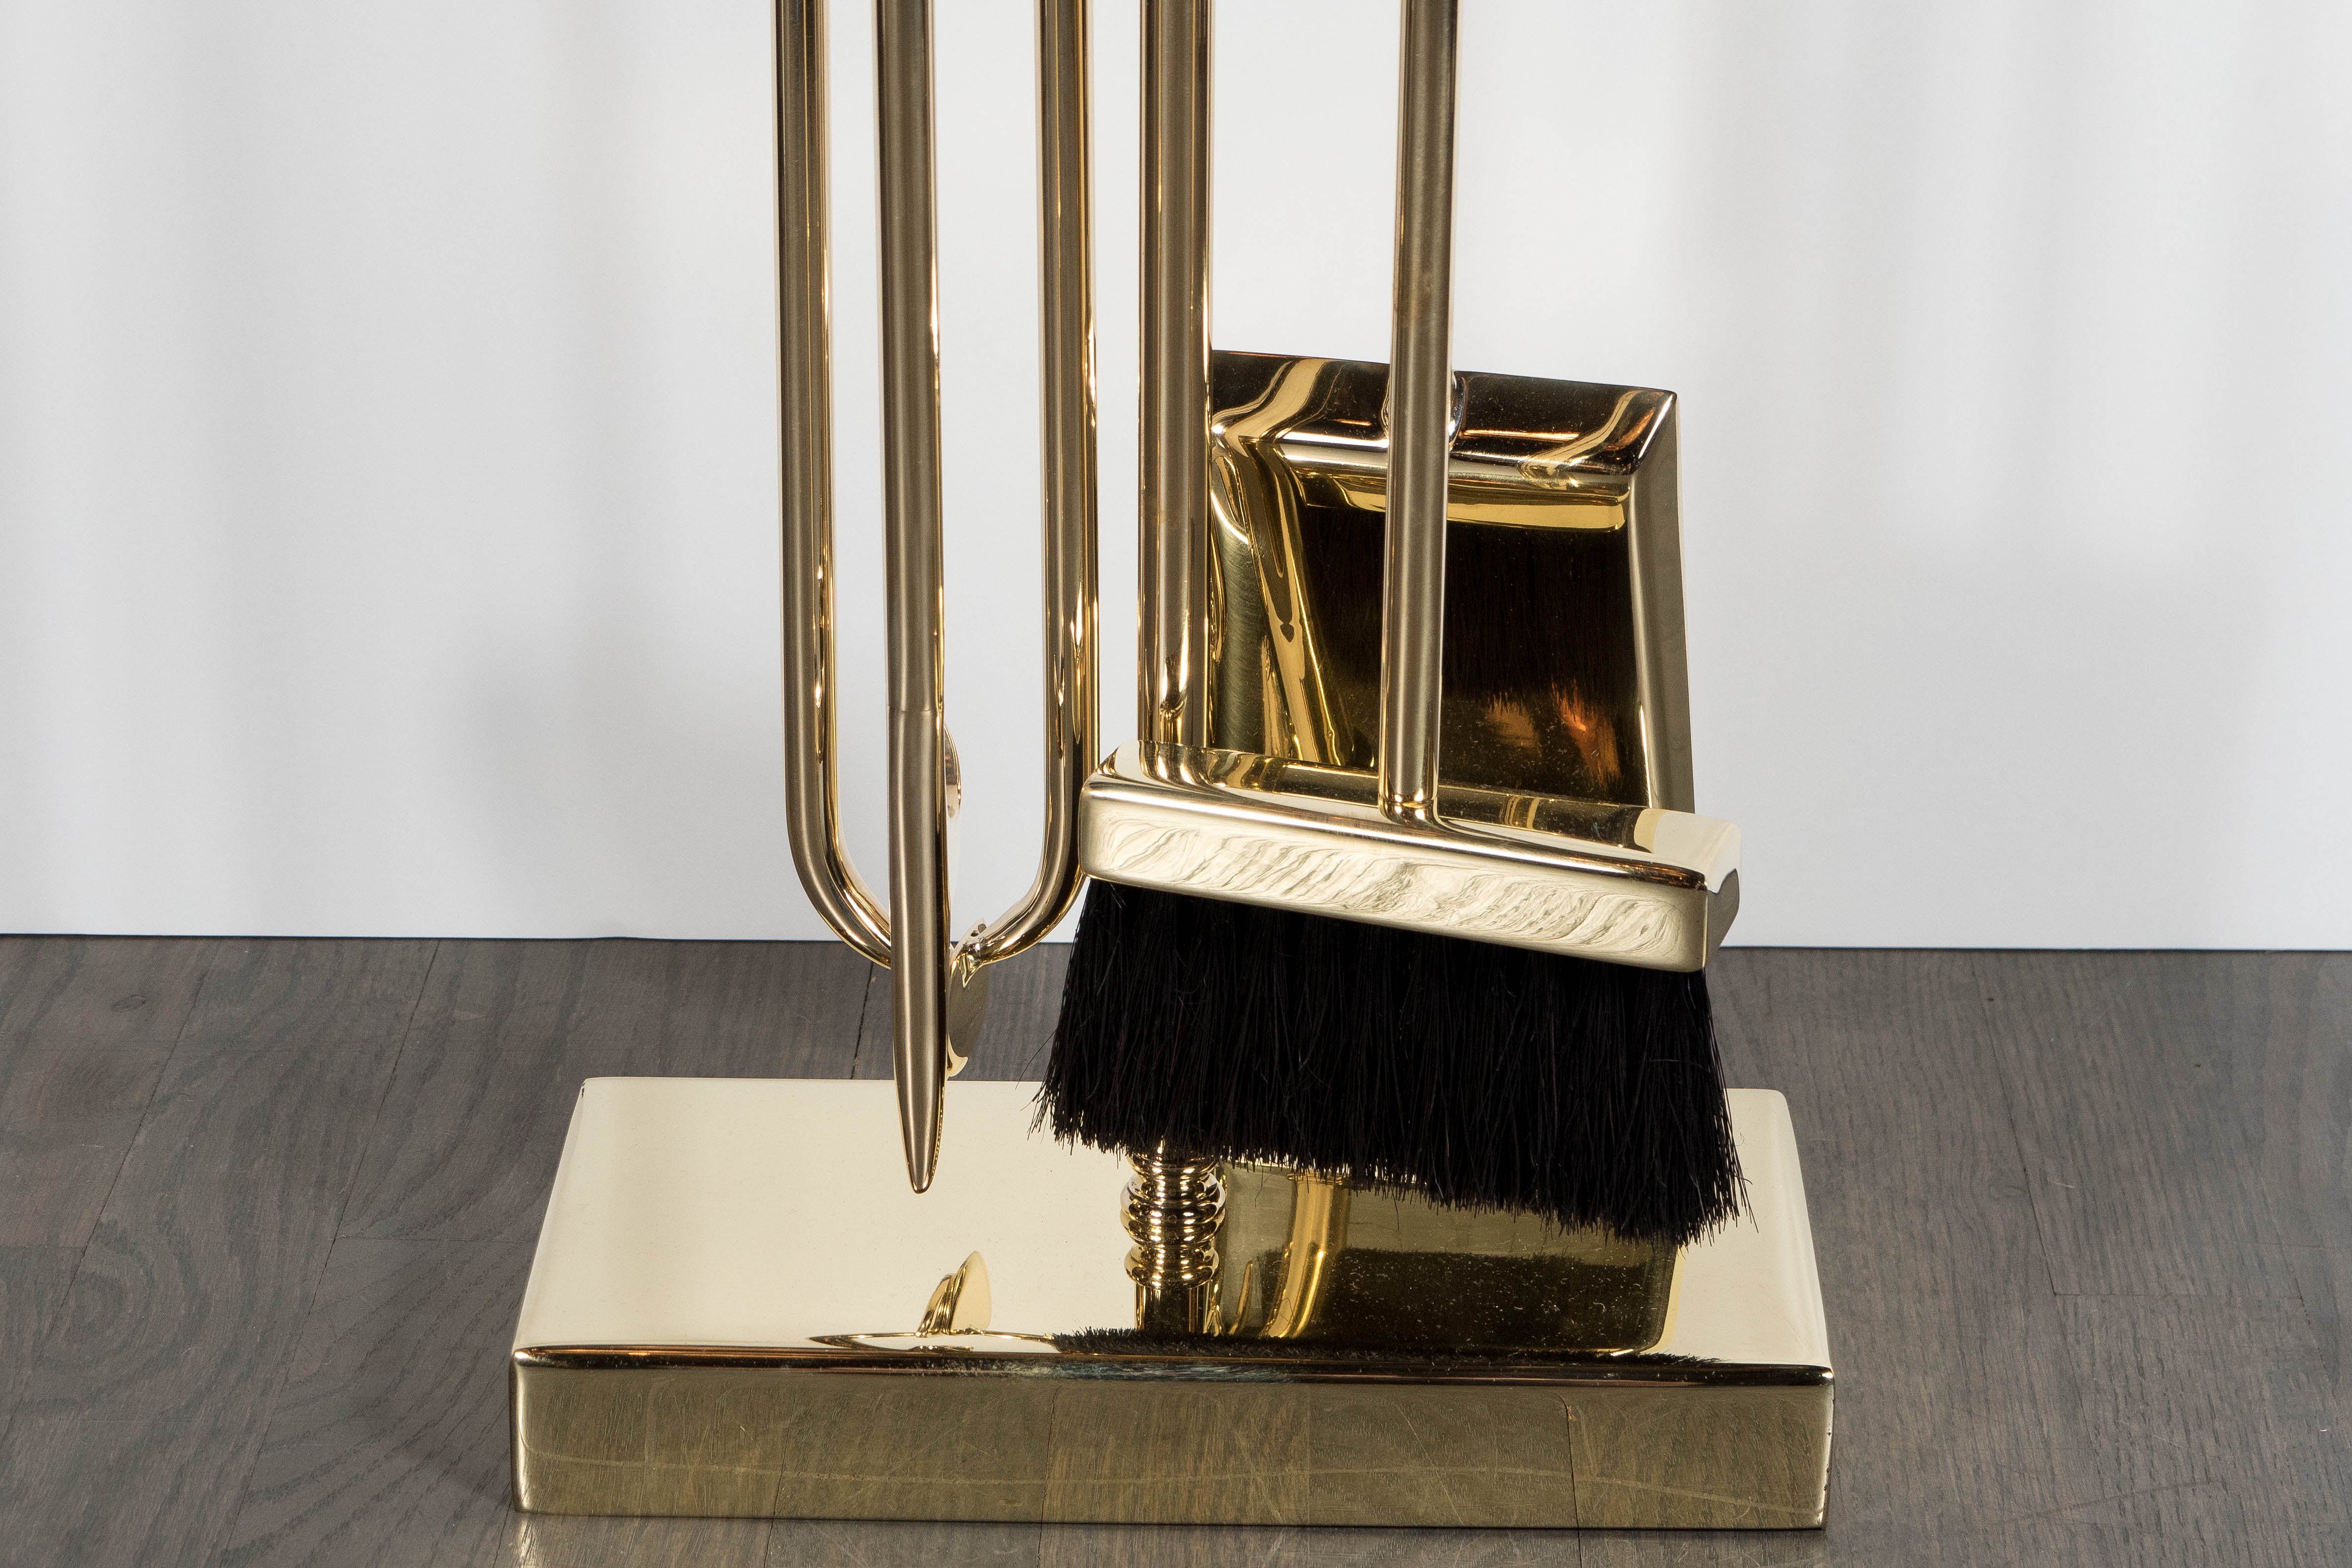 This refined and elegant Modernist four piece fire tool set was custom realized by artisans in New York State, exclusively for us. It features a shovel, brush, log holder and poker suspended from a notched rectangular top supported by a cylindrical